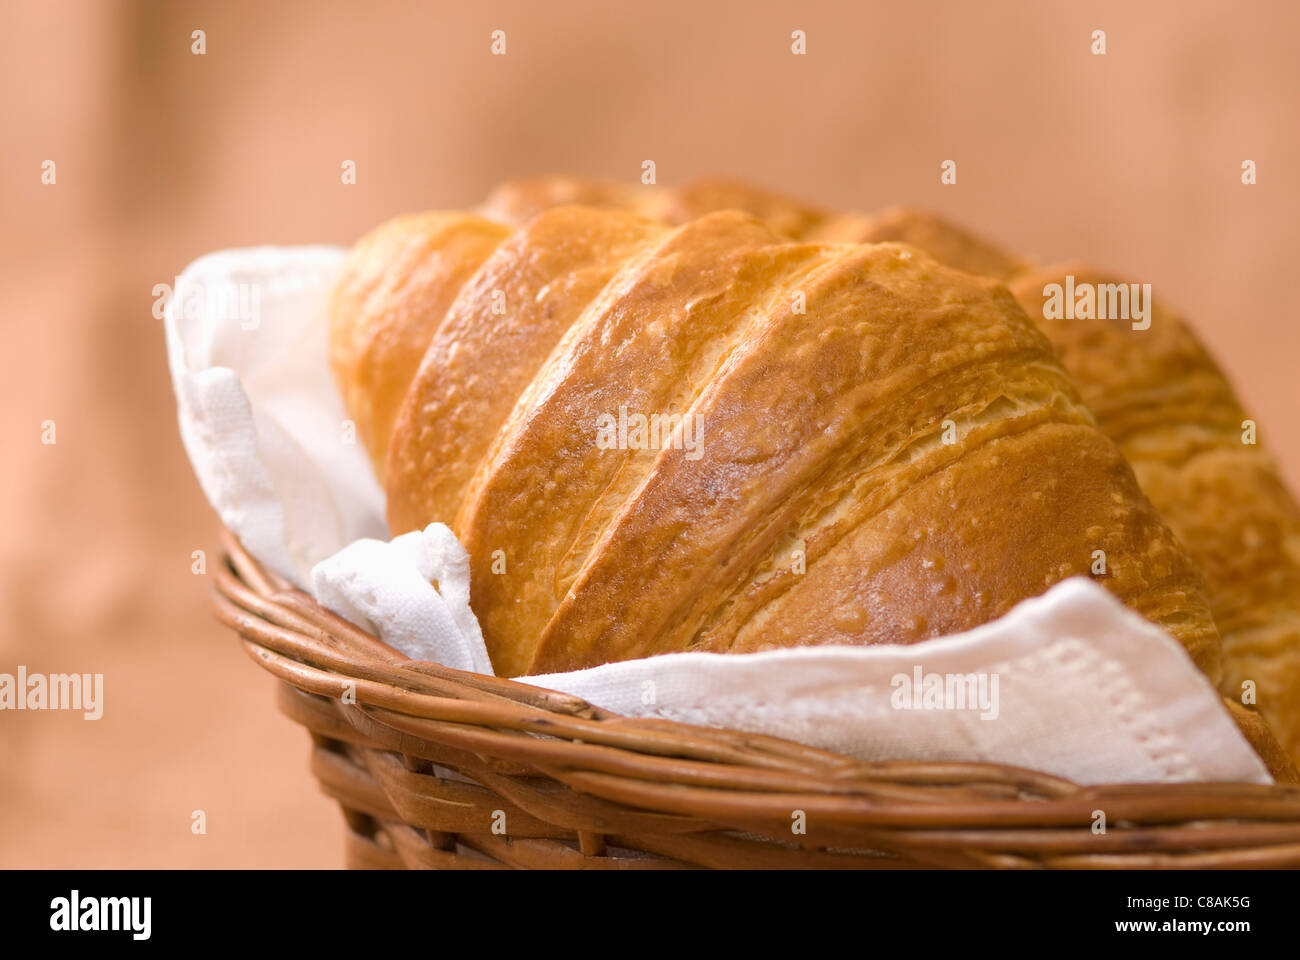 Croissants in a basket Stock Photo